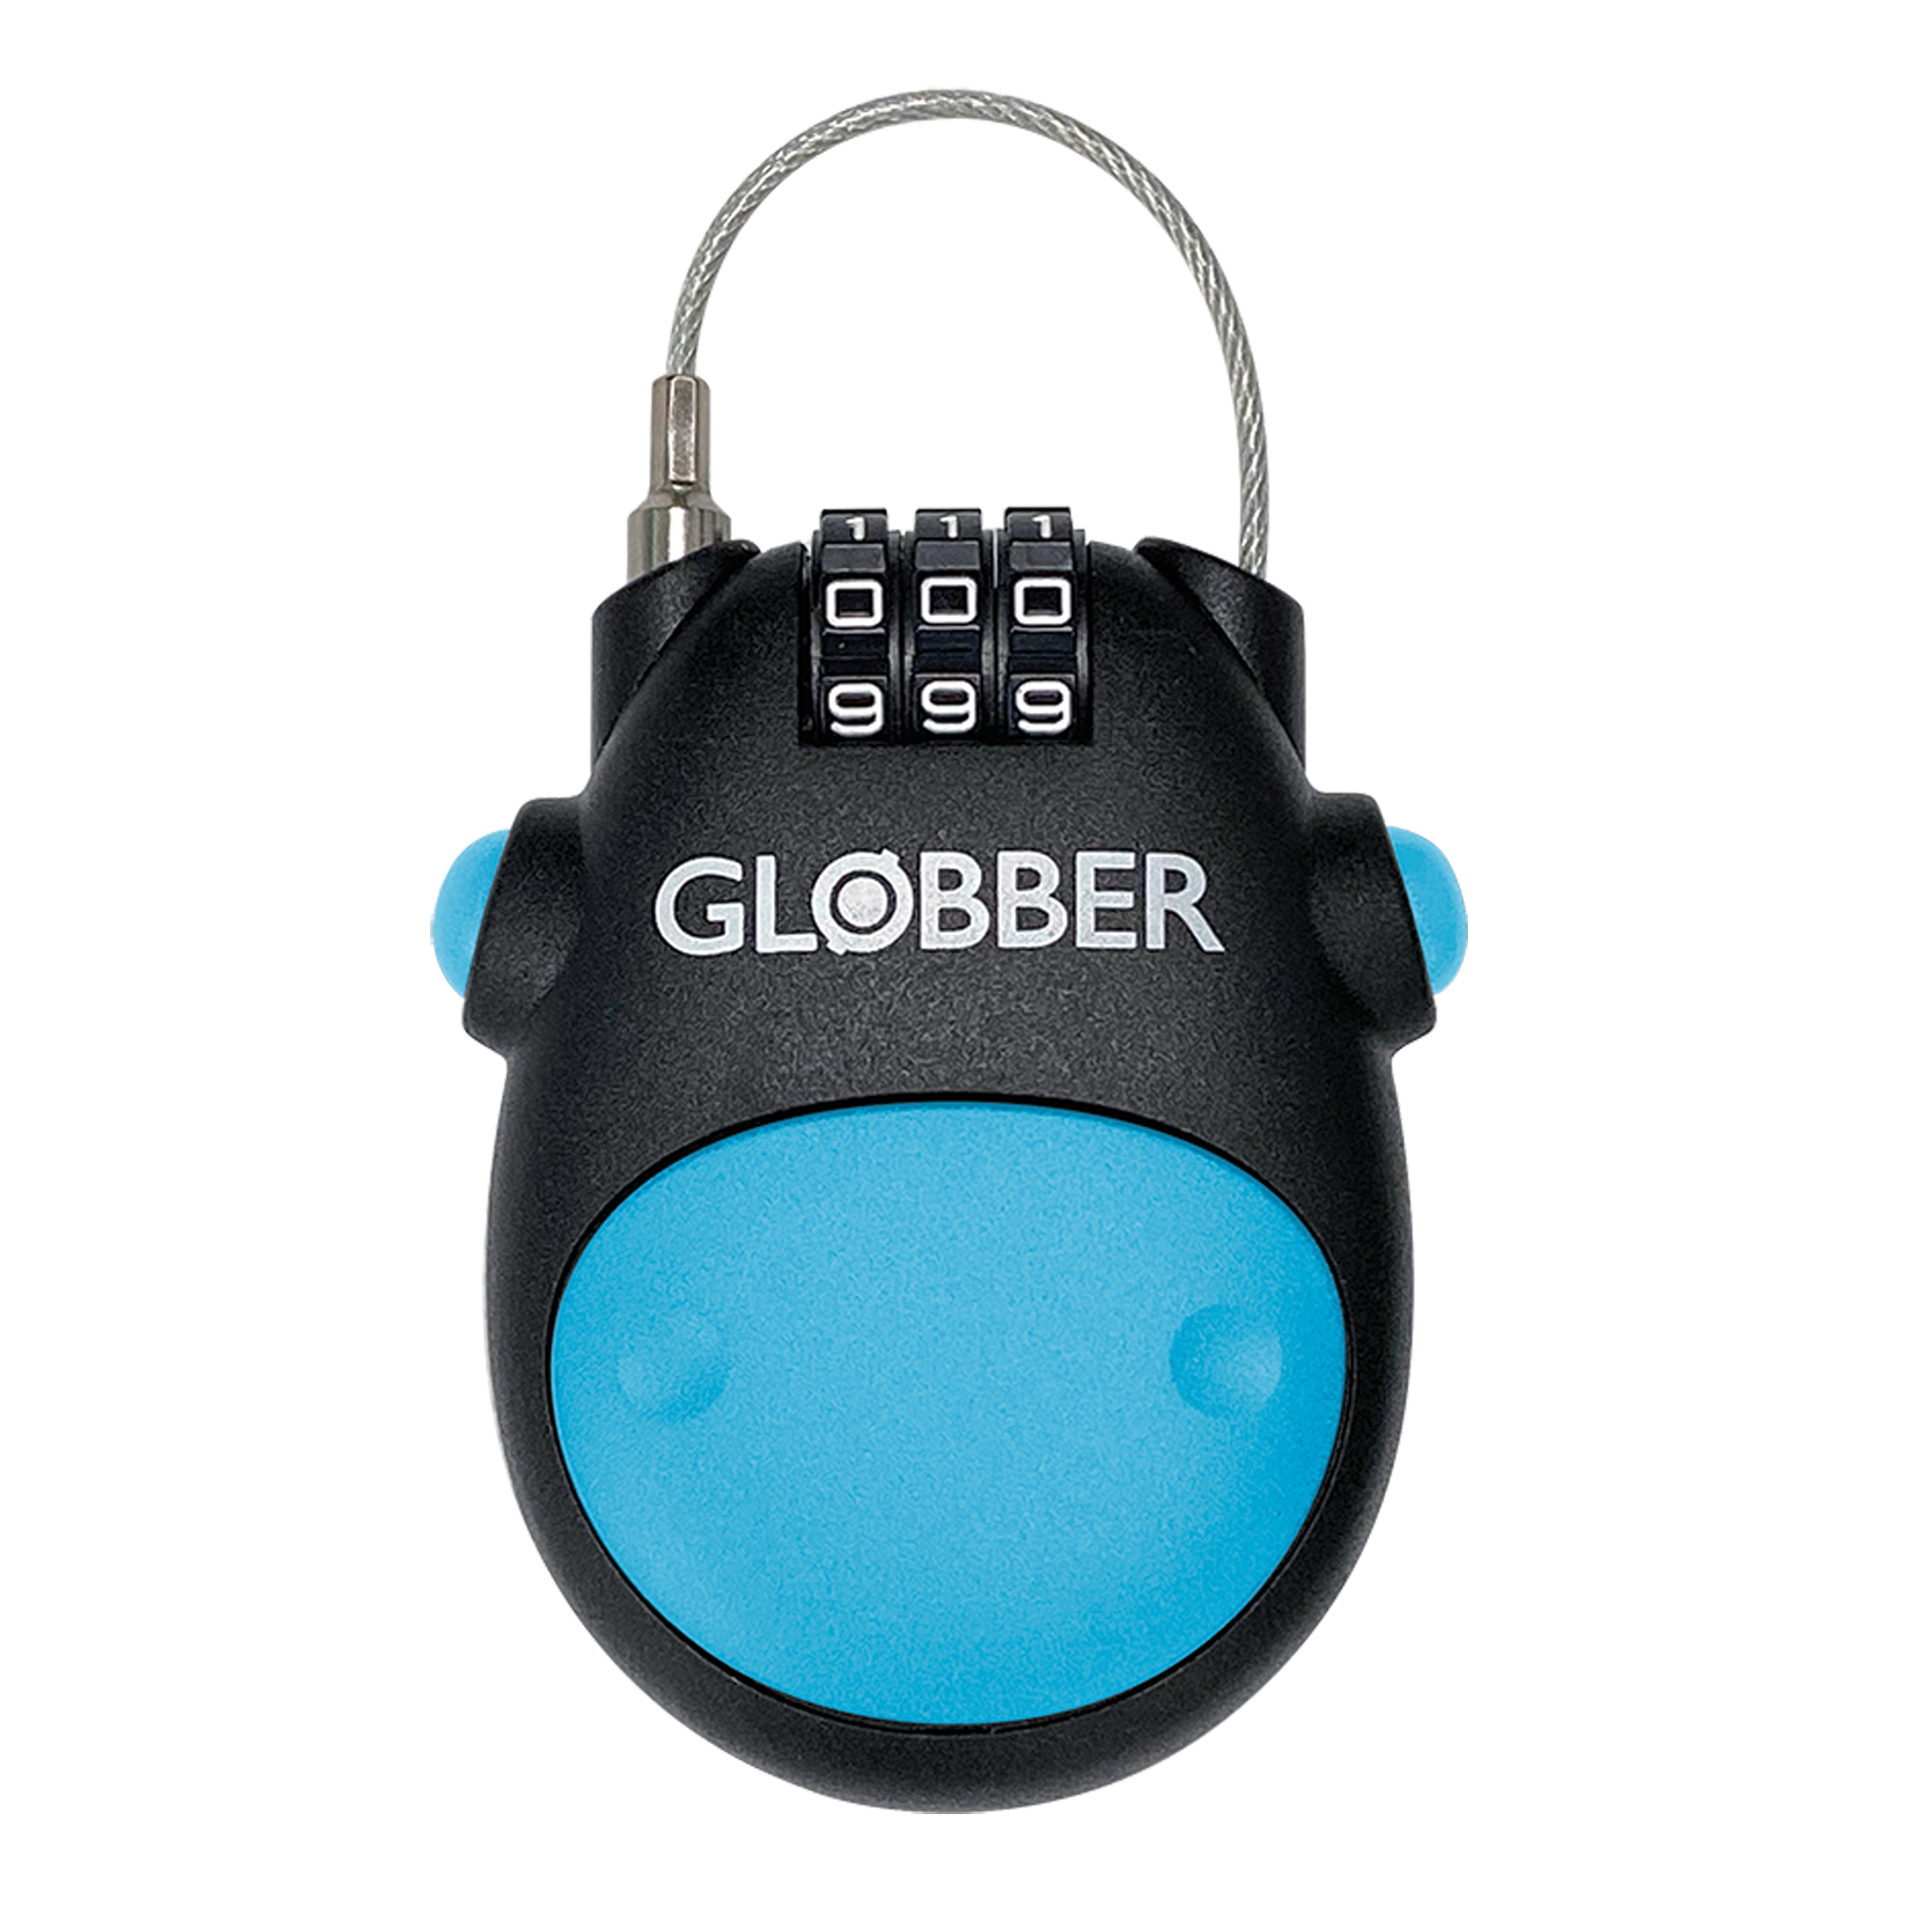 GLOBBER_LOCK-robust-and-ergonomic-designed-universal-lock-with-steel-cable_sky-blue 0